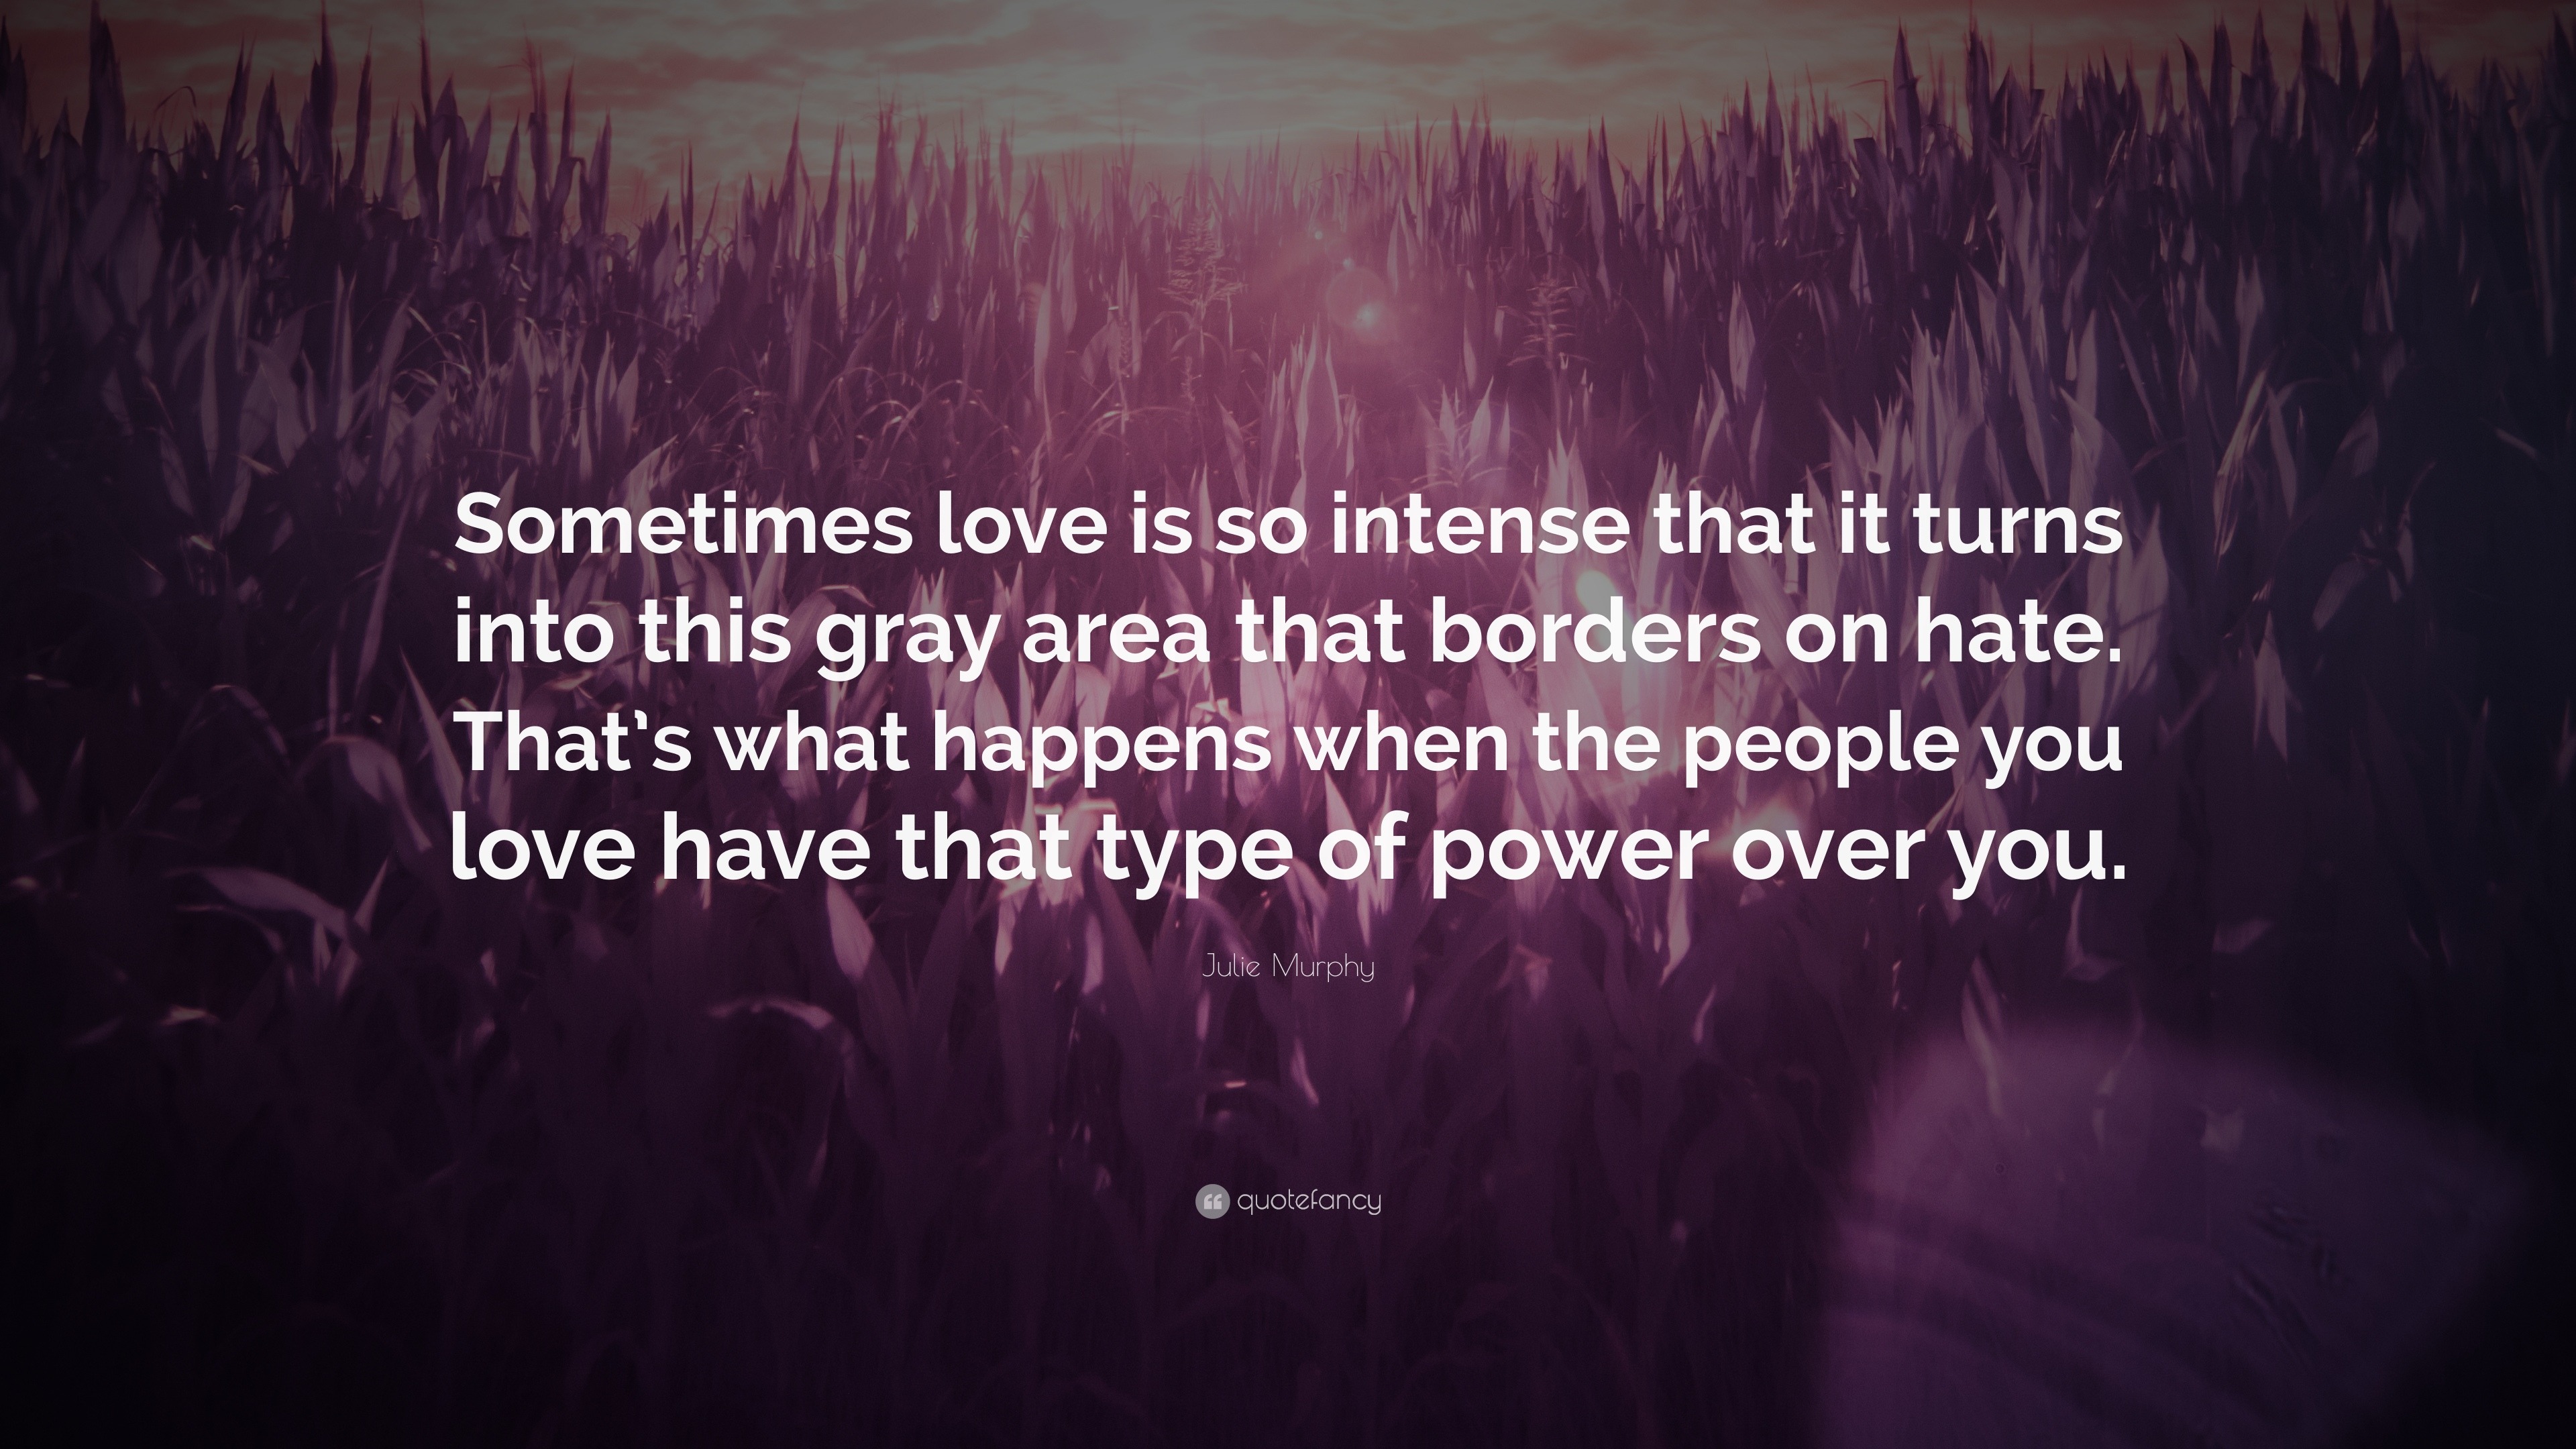 Julie Murphy Quote “Sometimes love is so intense that it turns into this gray